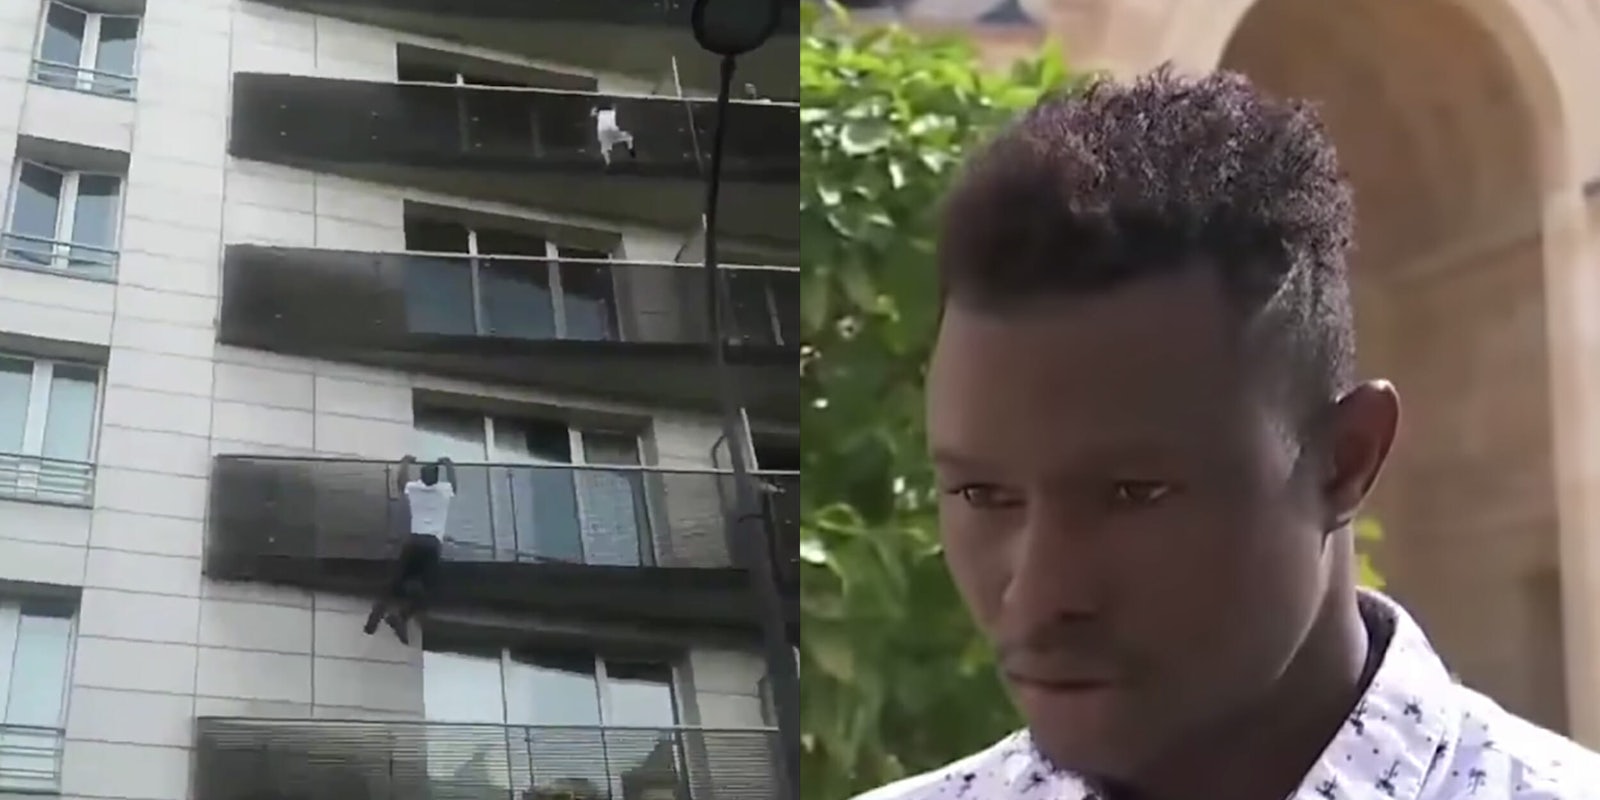 Mamoudou Gassama was offered French citizenship after saving a toddler who was hanging from a balcony.